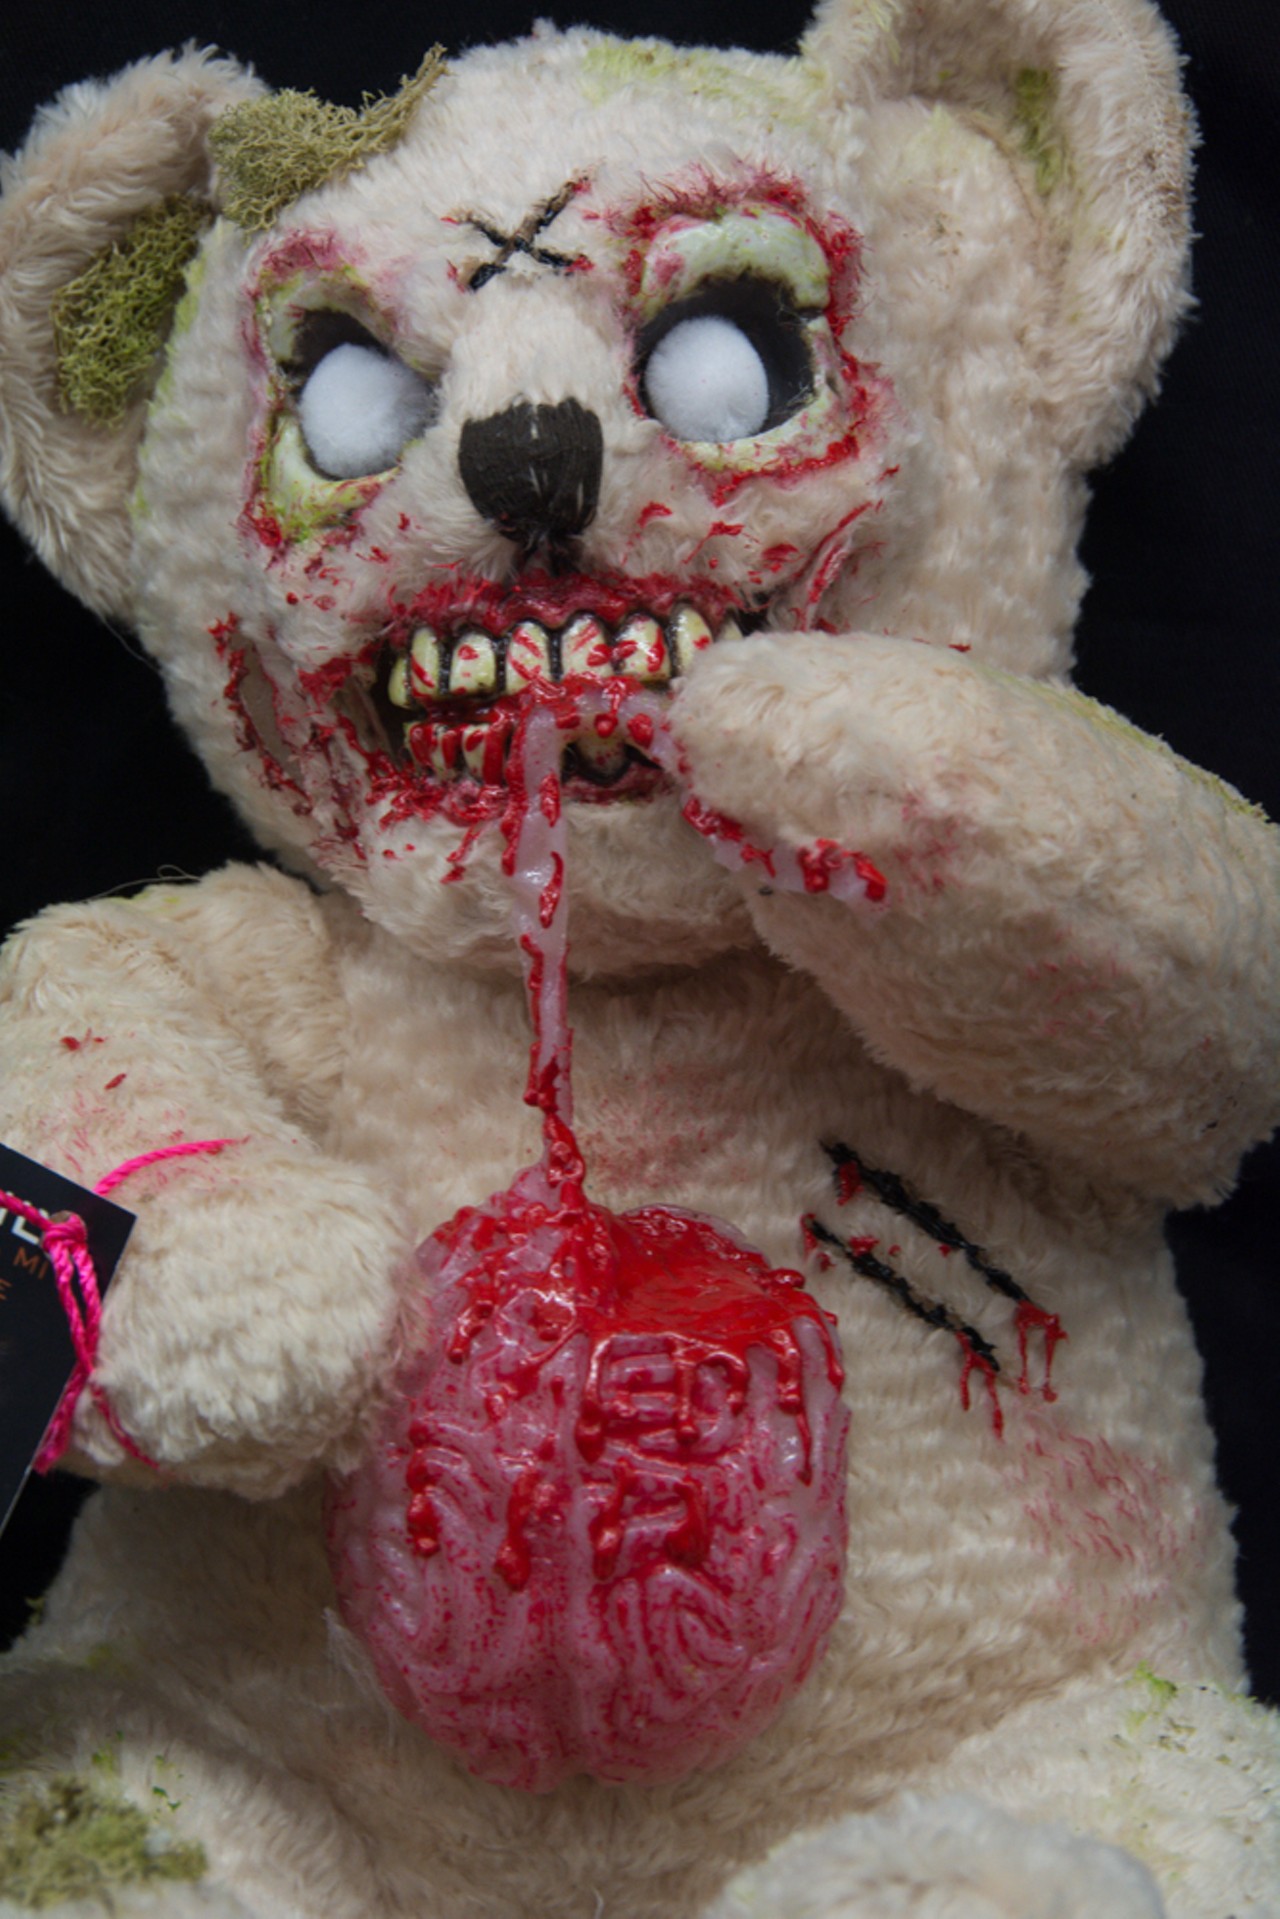 15 Gruesome Scare Bears by Jay Langley